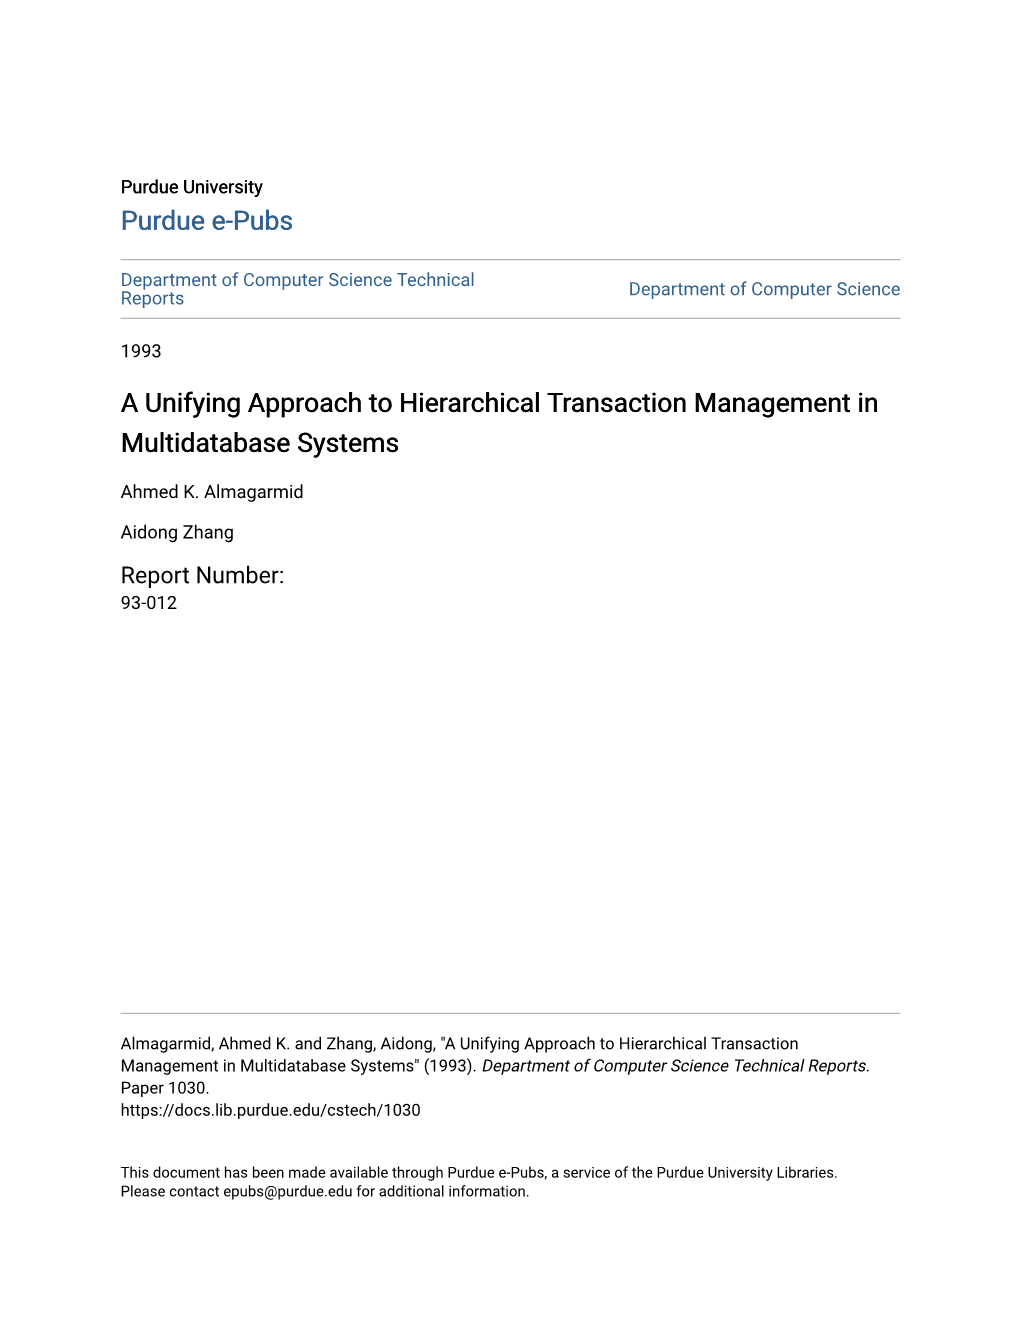 A Unifying Approach to Hierarchical Transaction Management in Multidatabase Systems